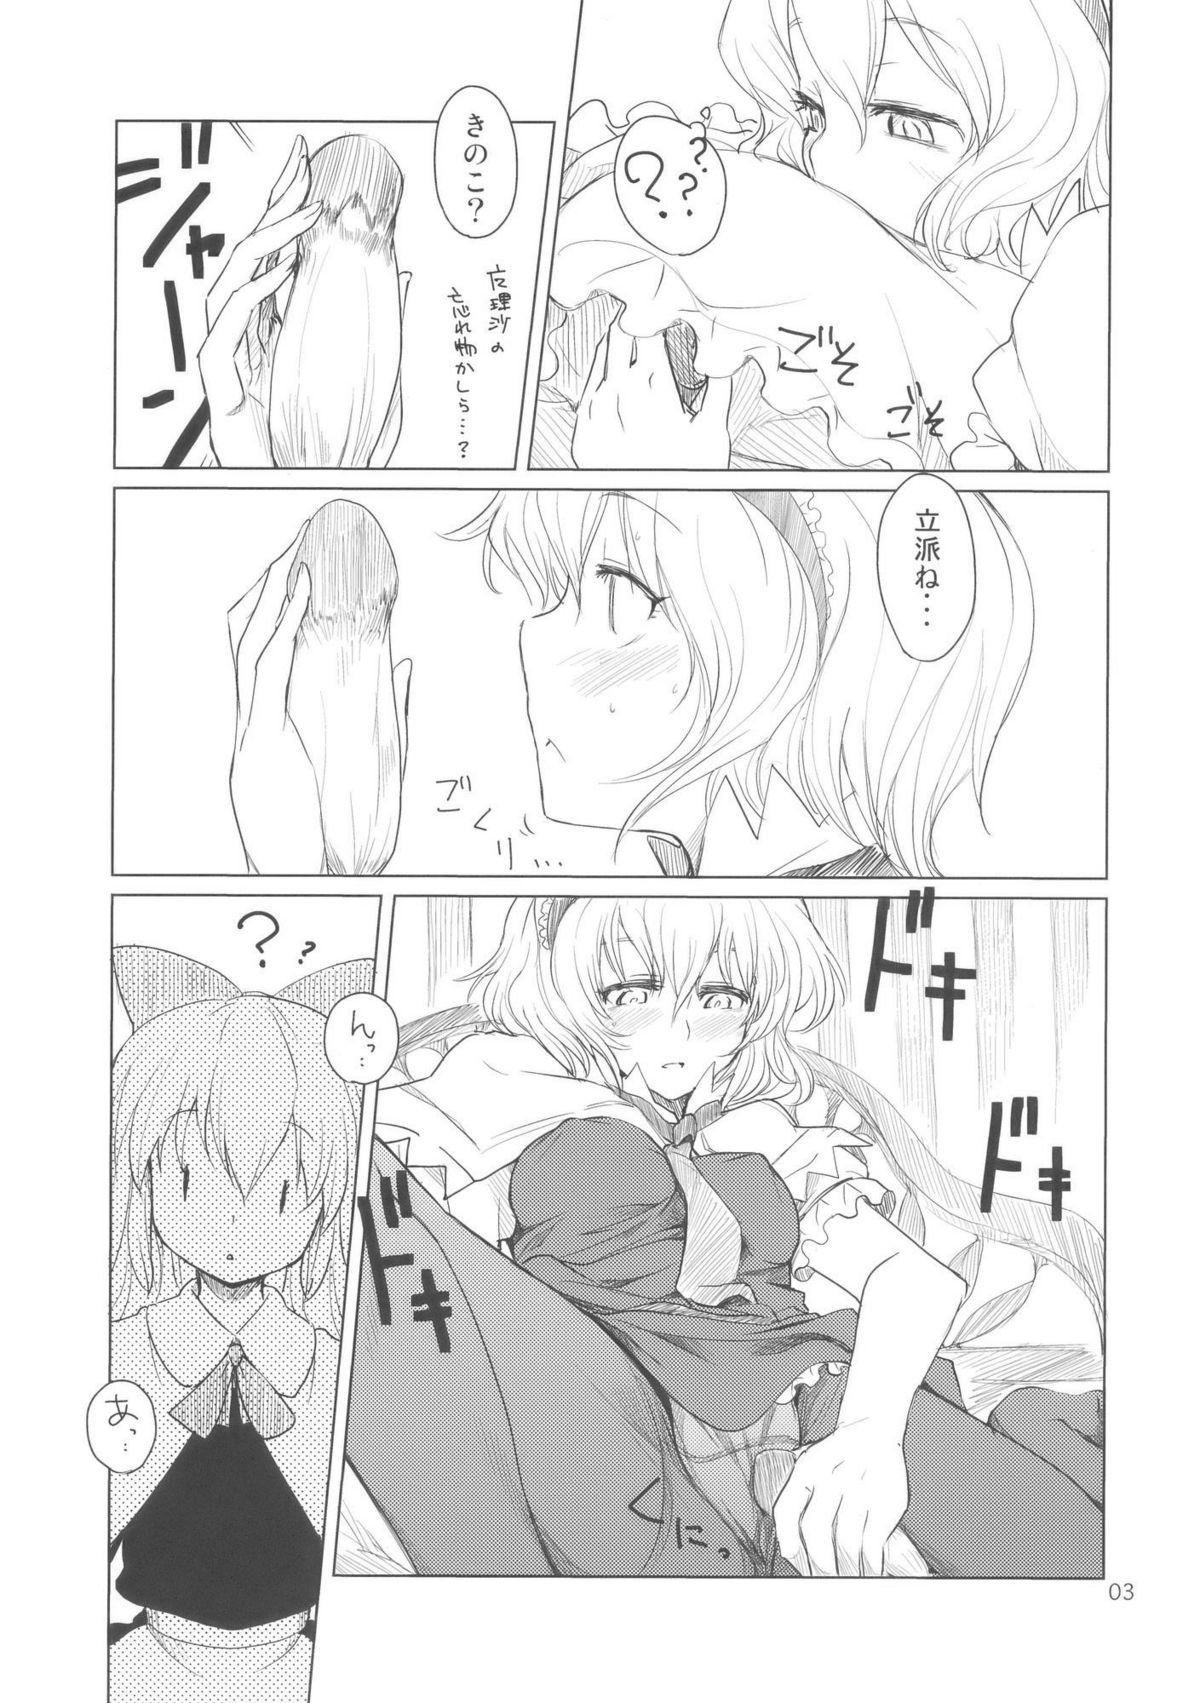 Audition Alice no Jikan - Touhou project Hardcore Sex - Page 5